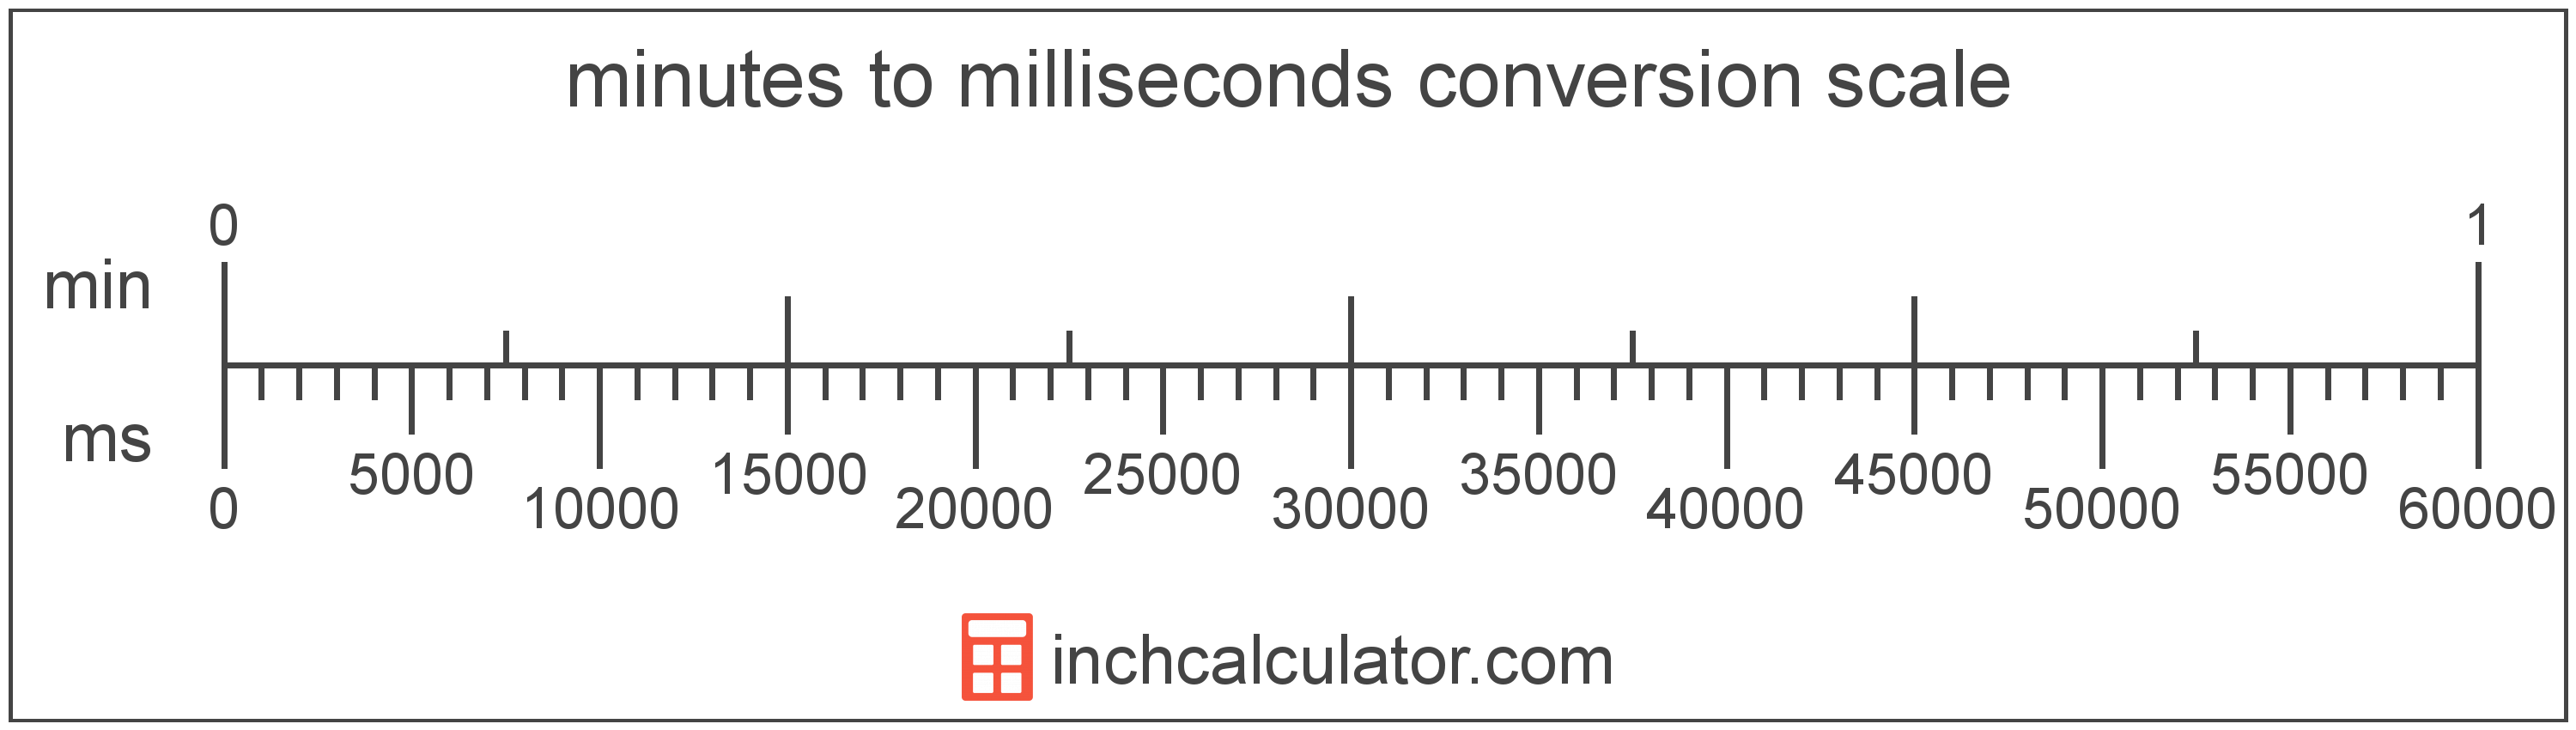 conversion scale showing minutes and equivalent milliseconds time values